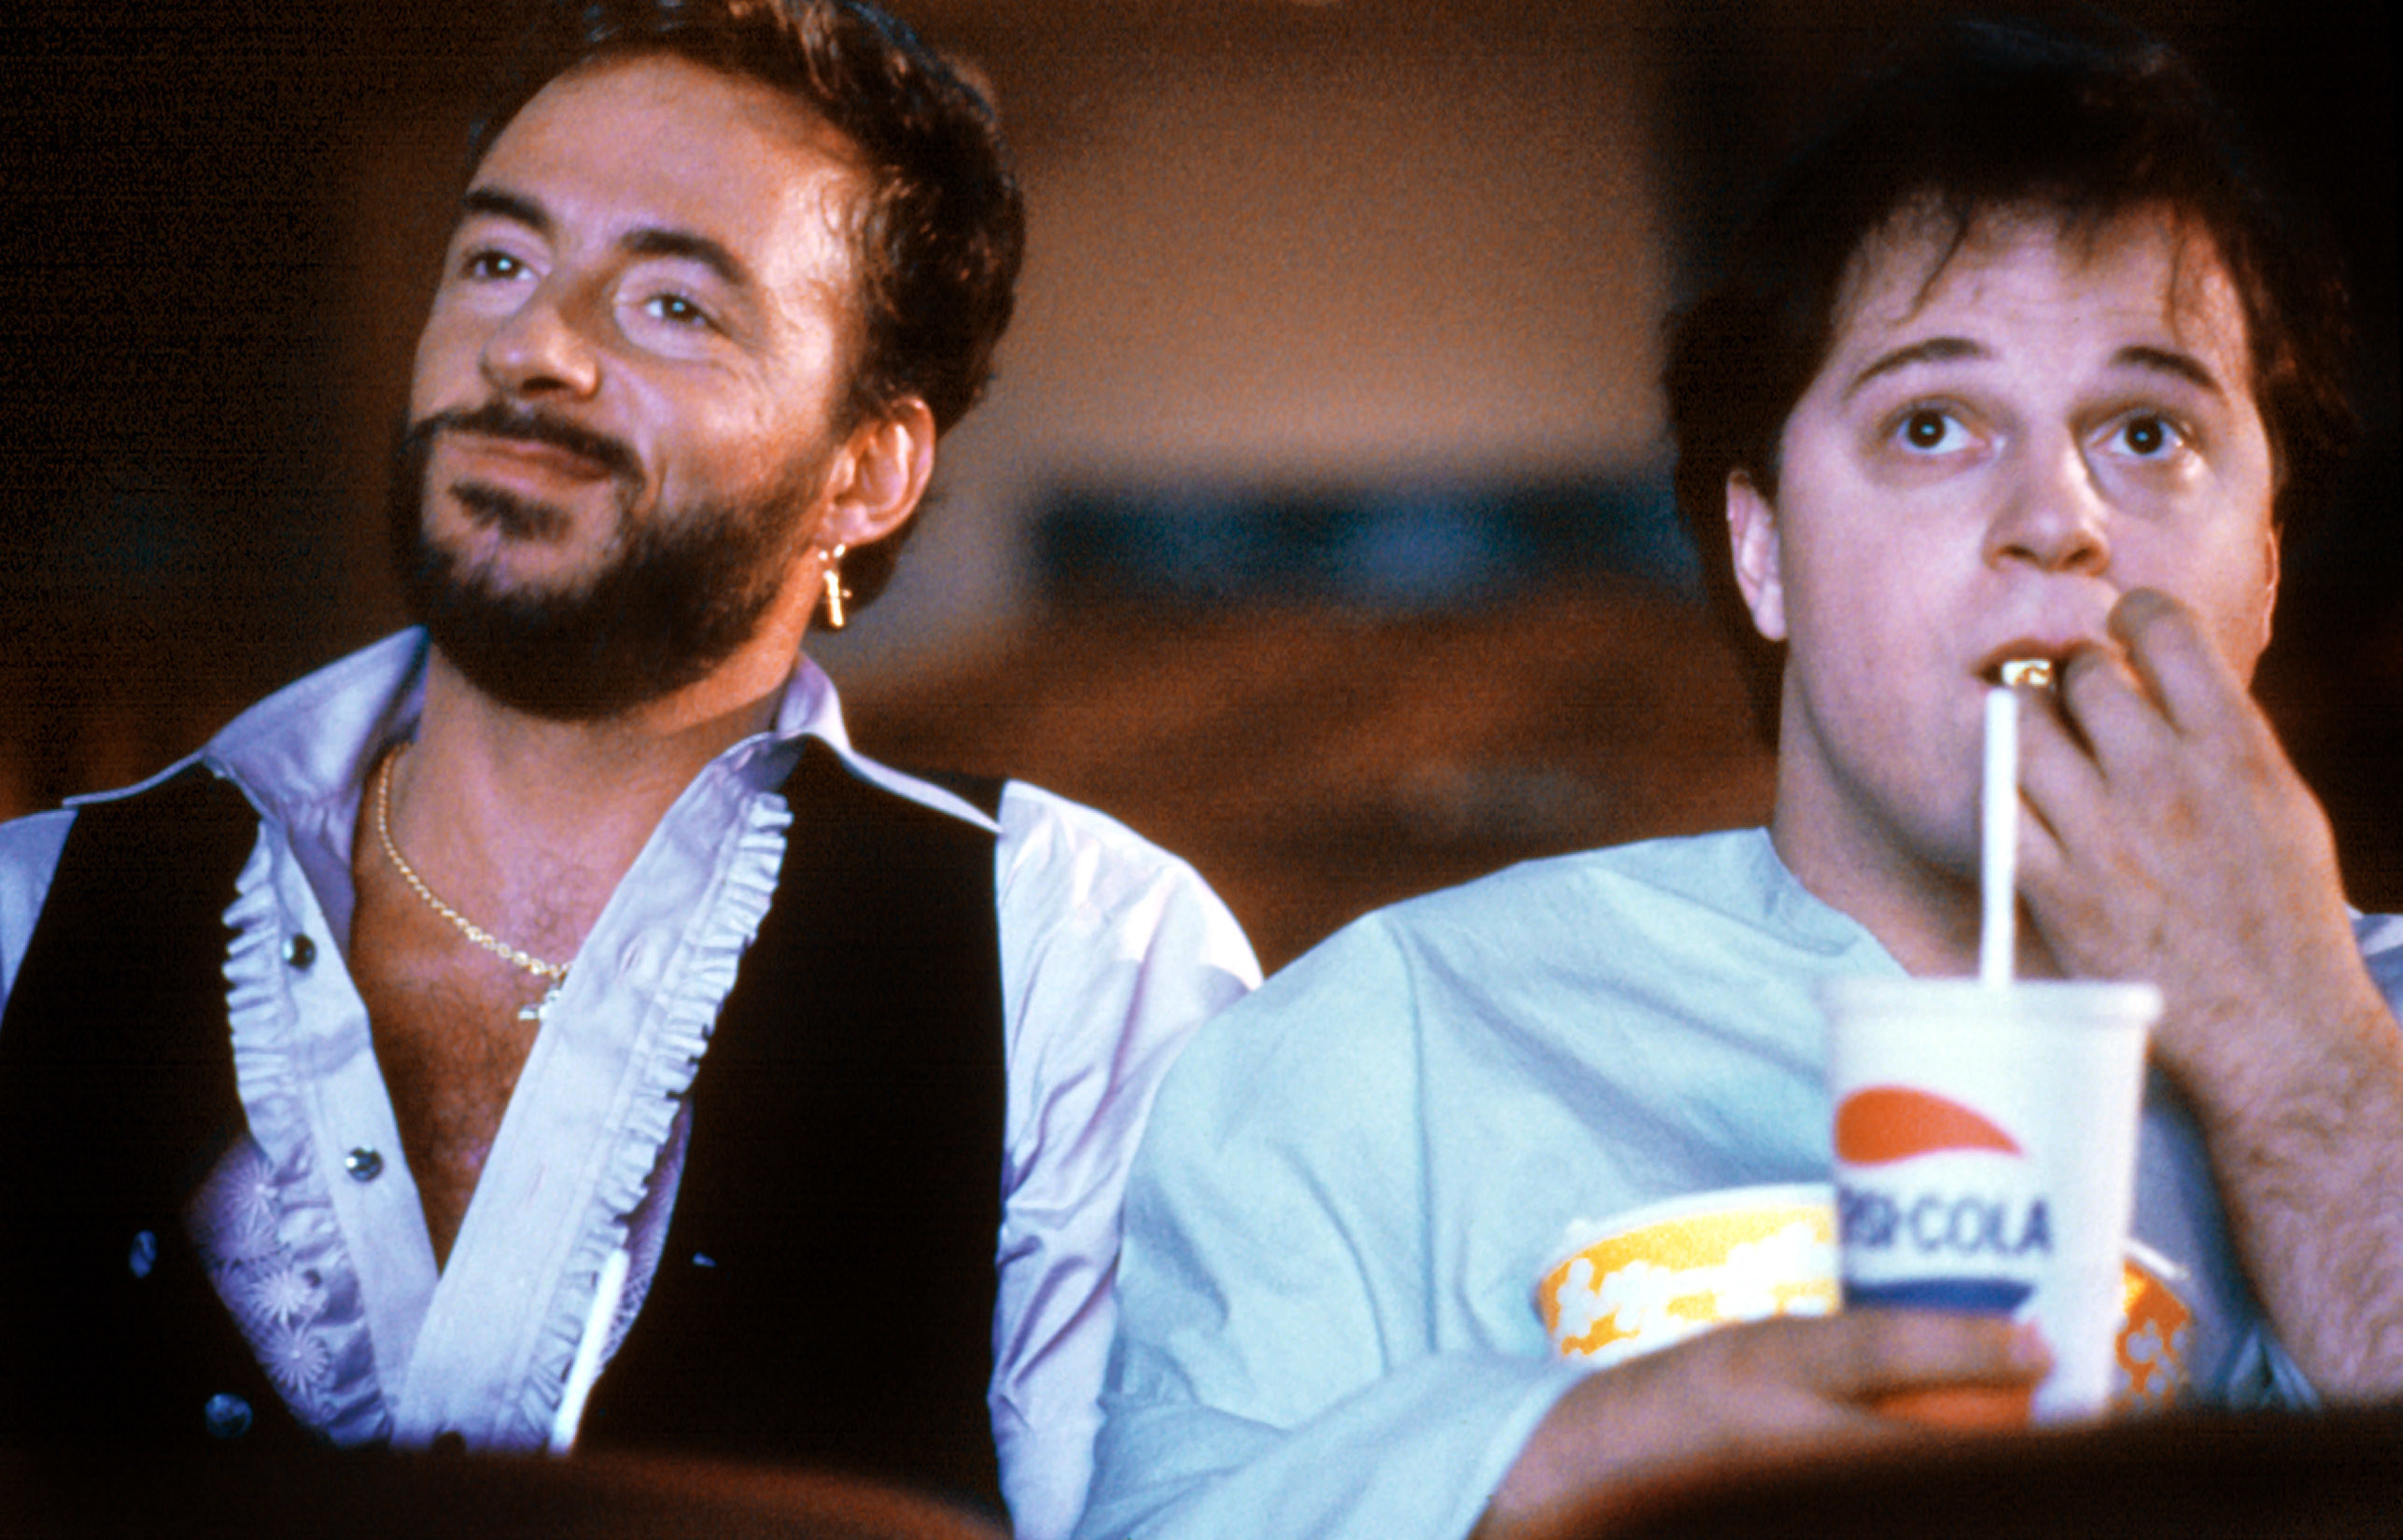 Michael Chiklis as John Belushi watches a movie in &quot;Wired&quot;